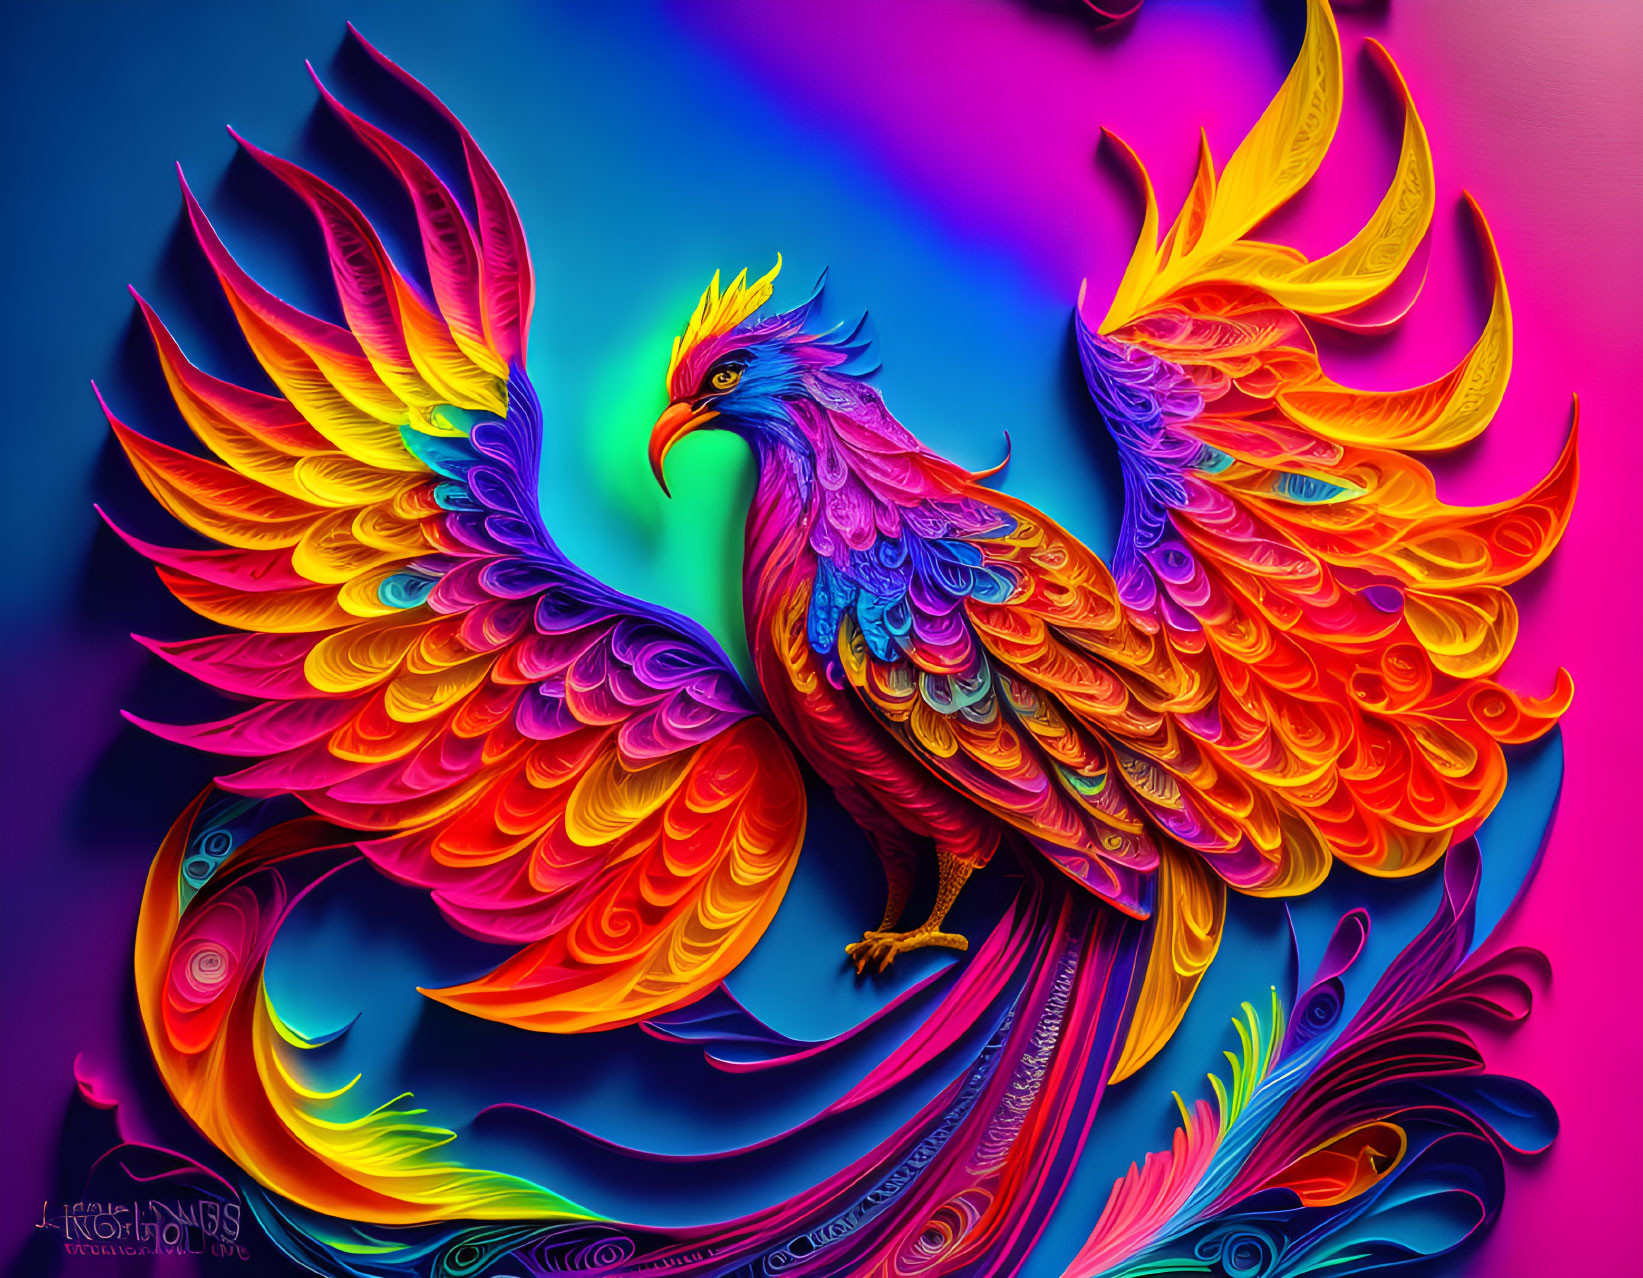 Colorful Phoenix Artwork with Feather Details in Blue, Red, Yellow, and Purple